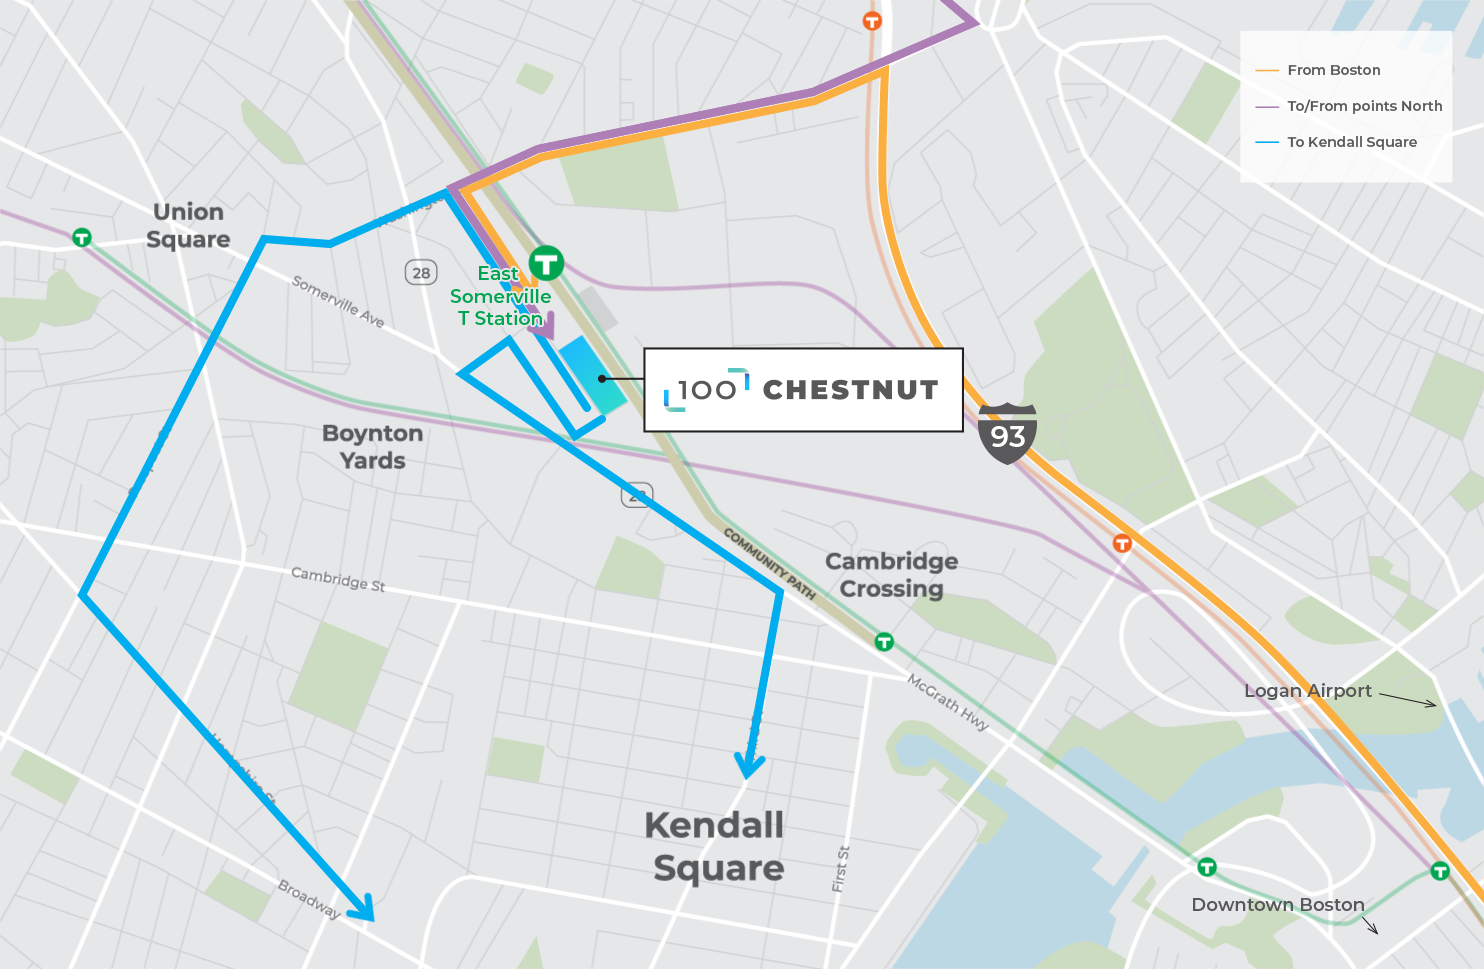 A map of the area around 100 Chesnut showing driving routes to and from Downtown Boston, Kendall Square, and points north.